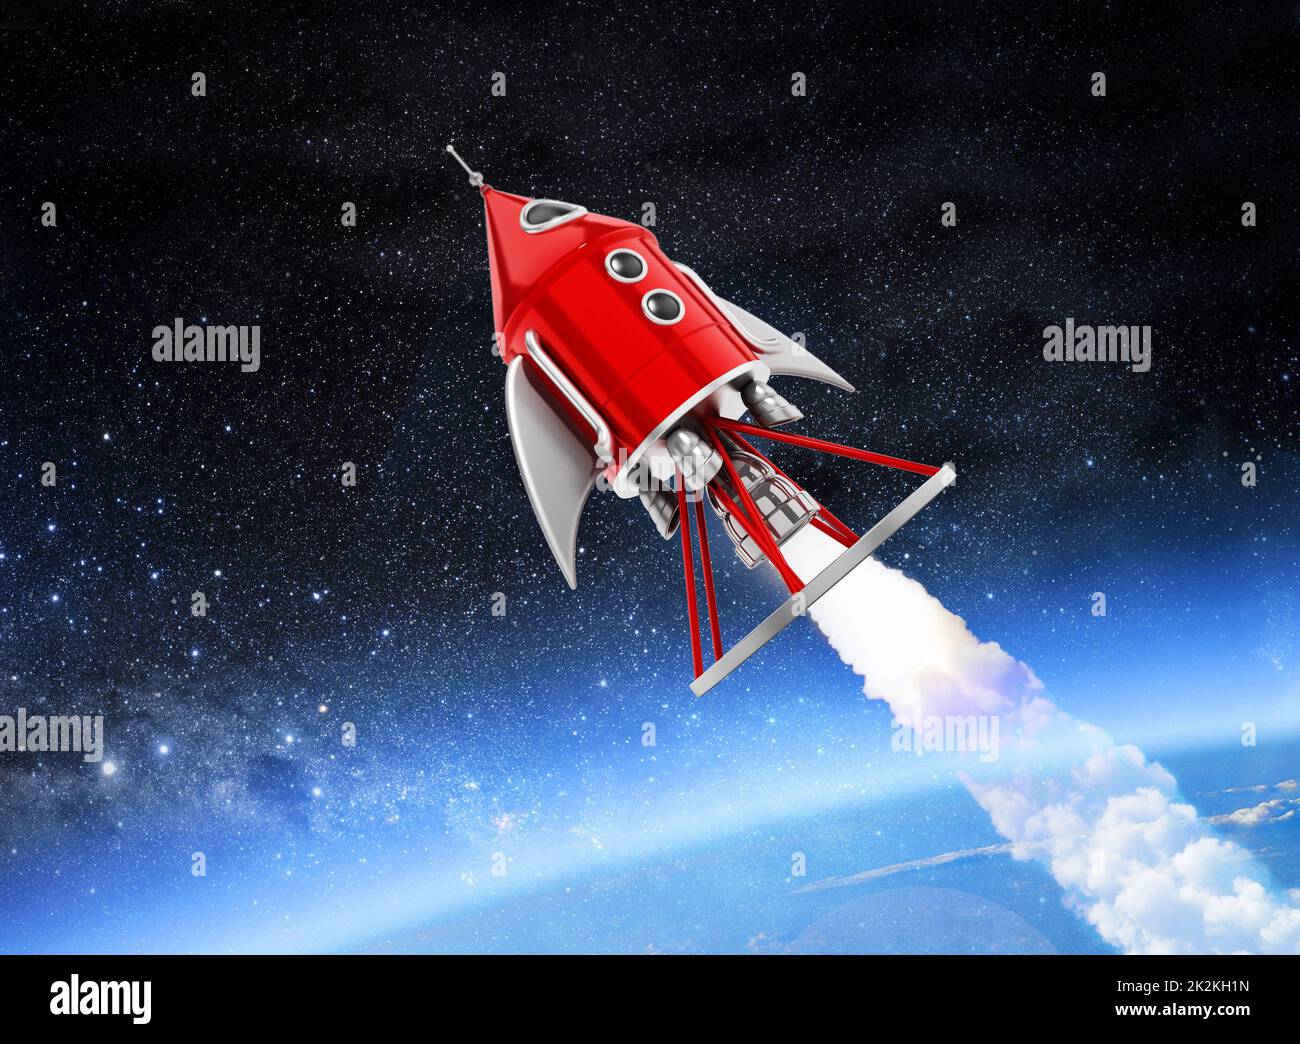 Vintage space rocket leaving the Earth's atmosphere. 3D illustration Stock Photo